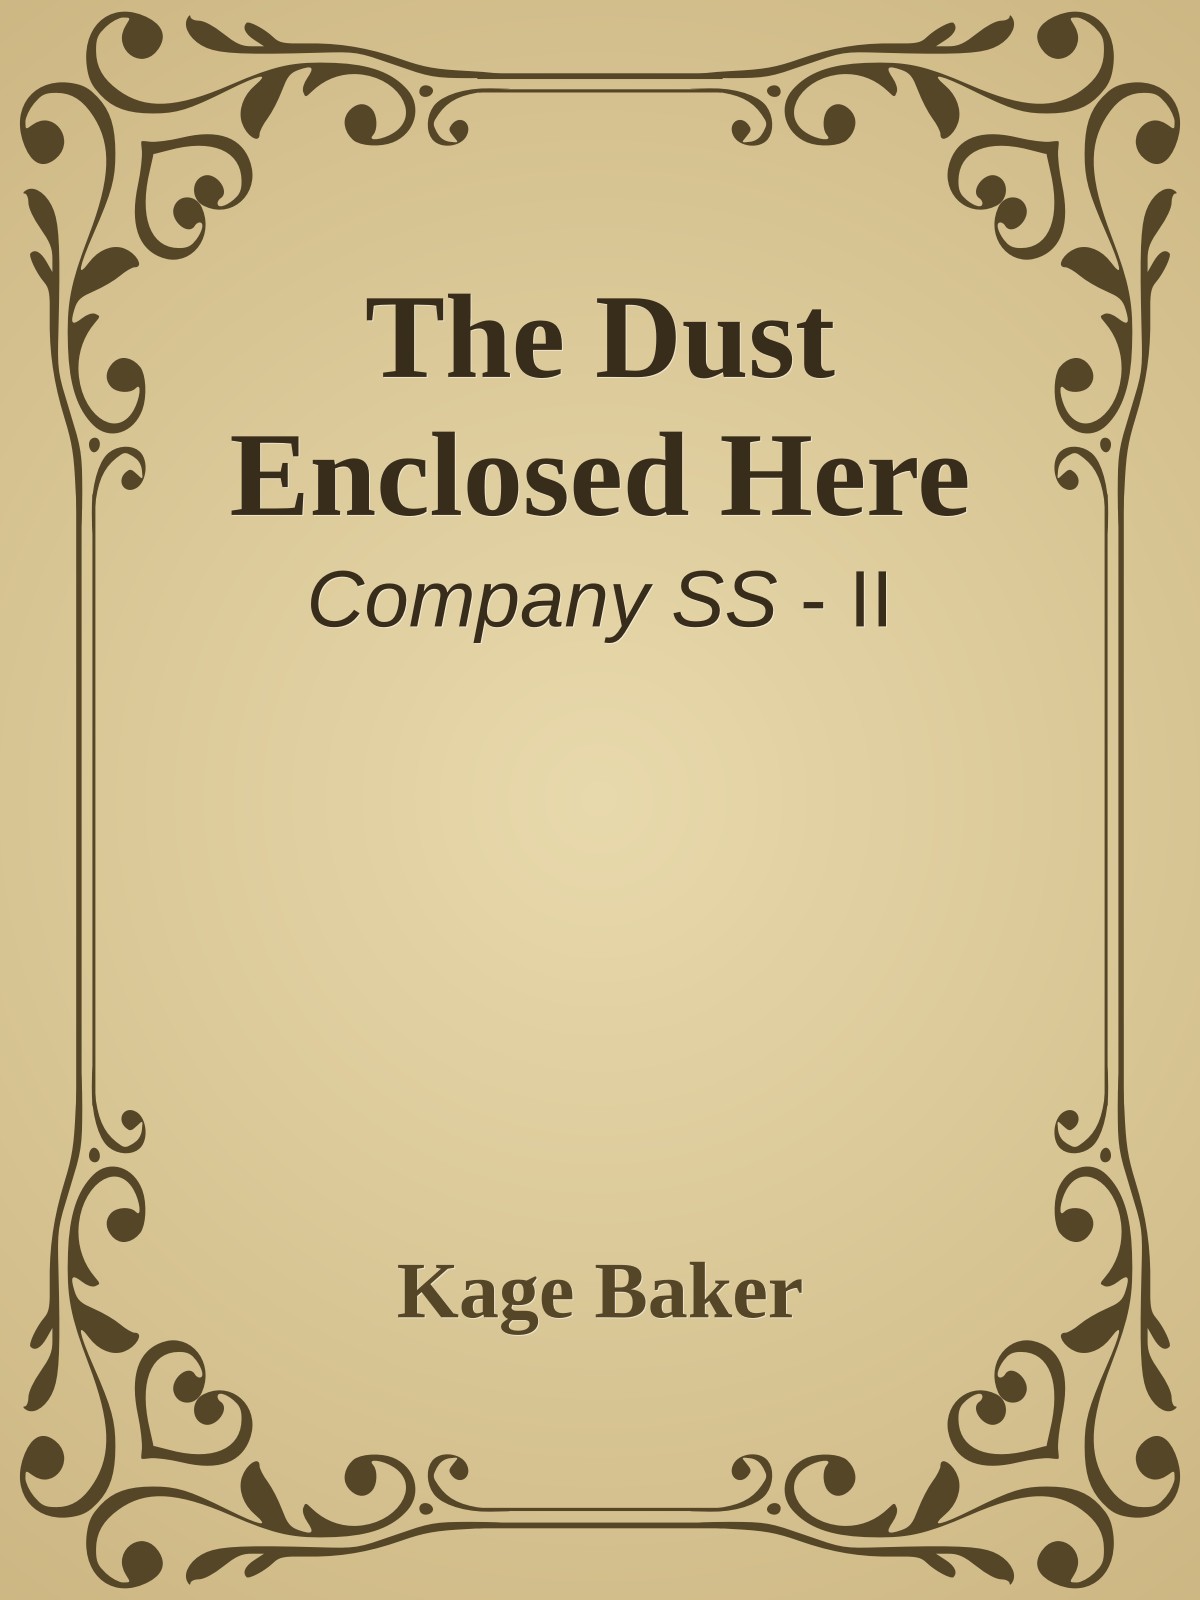 The Dust Enclosed Here